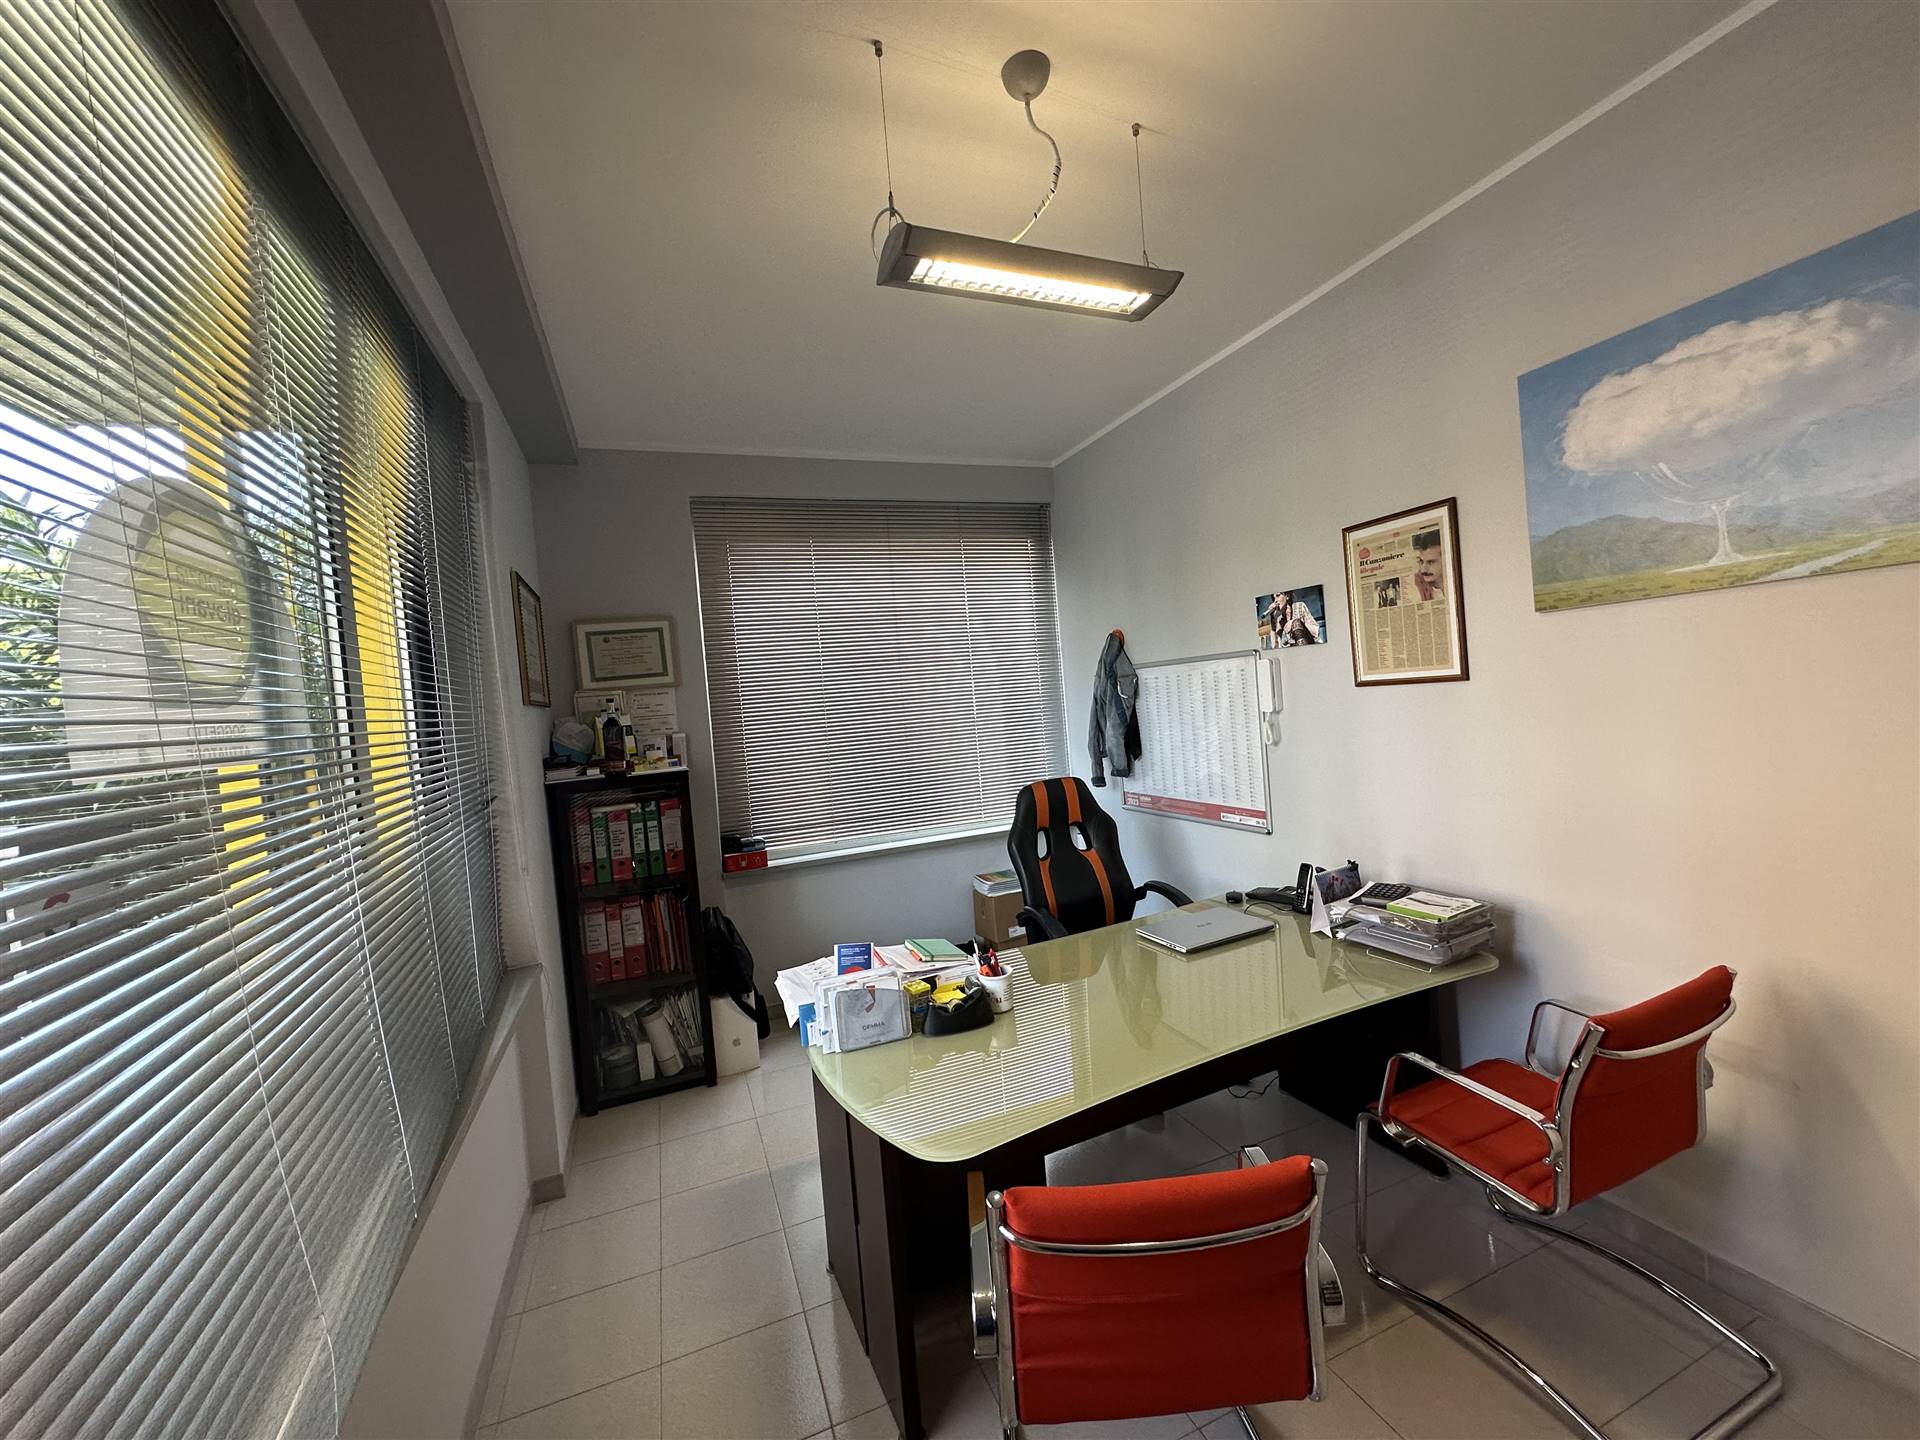 SEMICENTRO, VASTO, Office for rent of 130 Sq. mt., Restored, Heating Individual heating system, Energetic class: D, Epi: 0 kwh/m3 year, placed at 